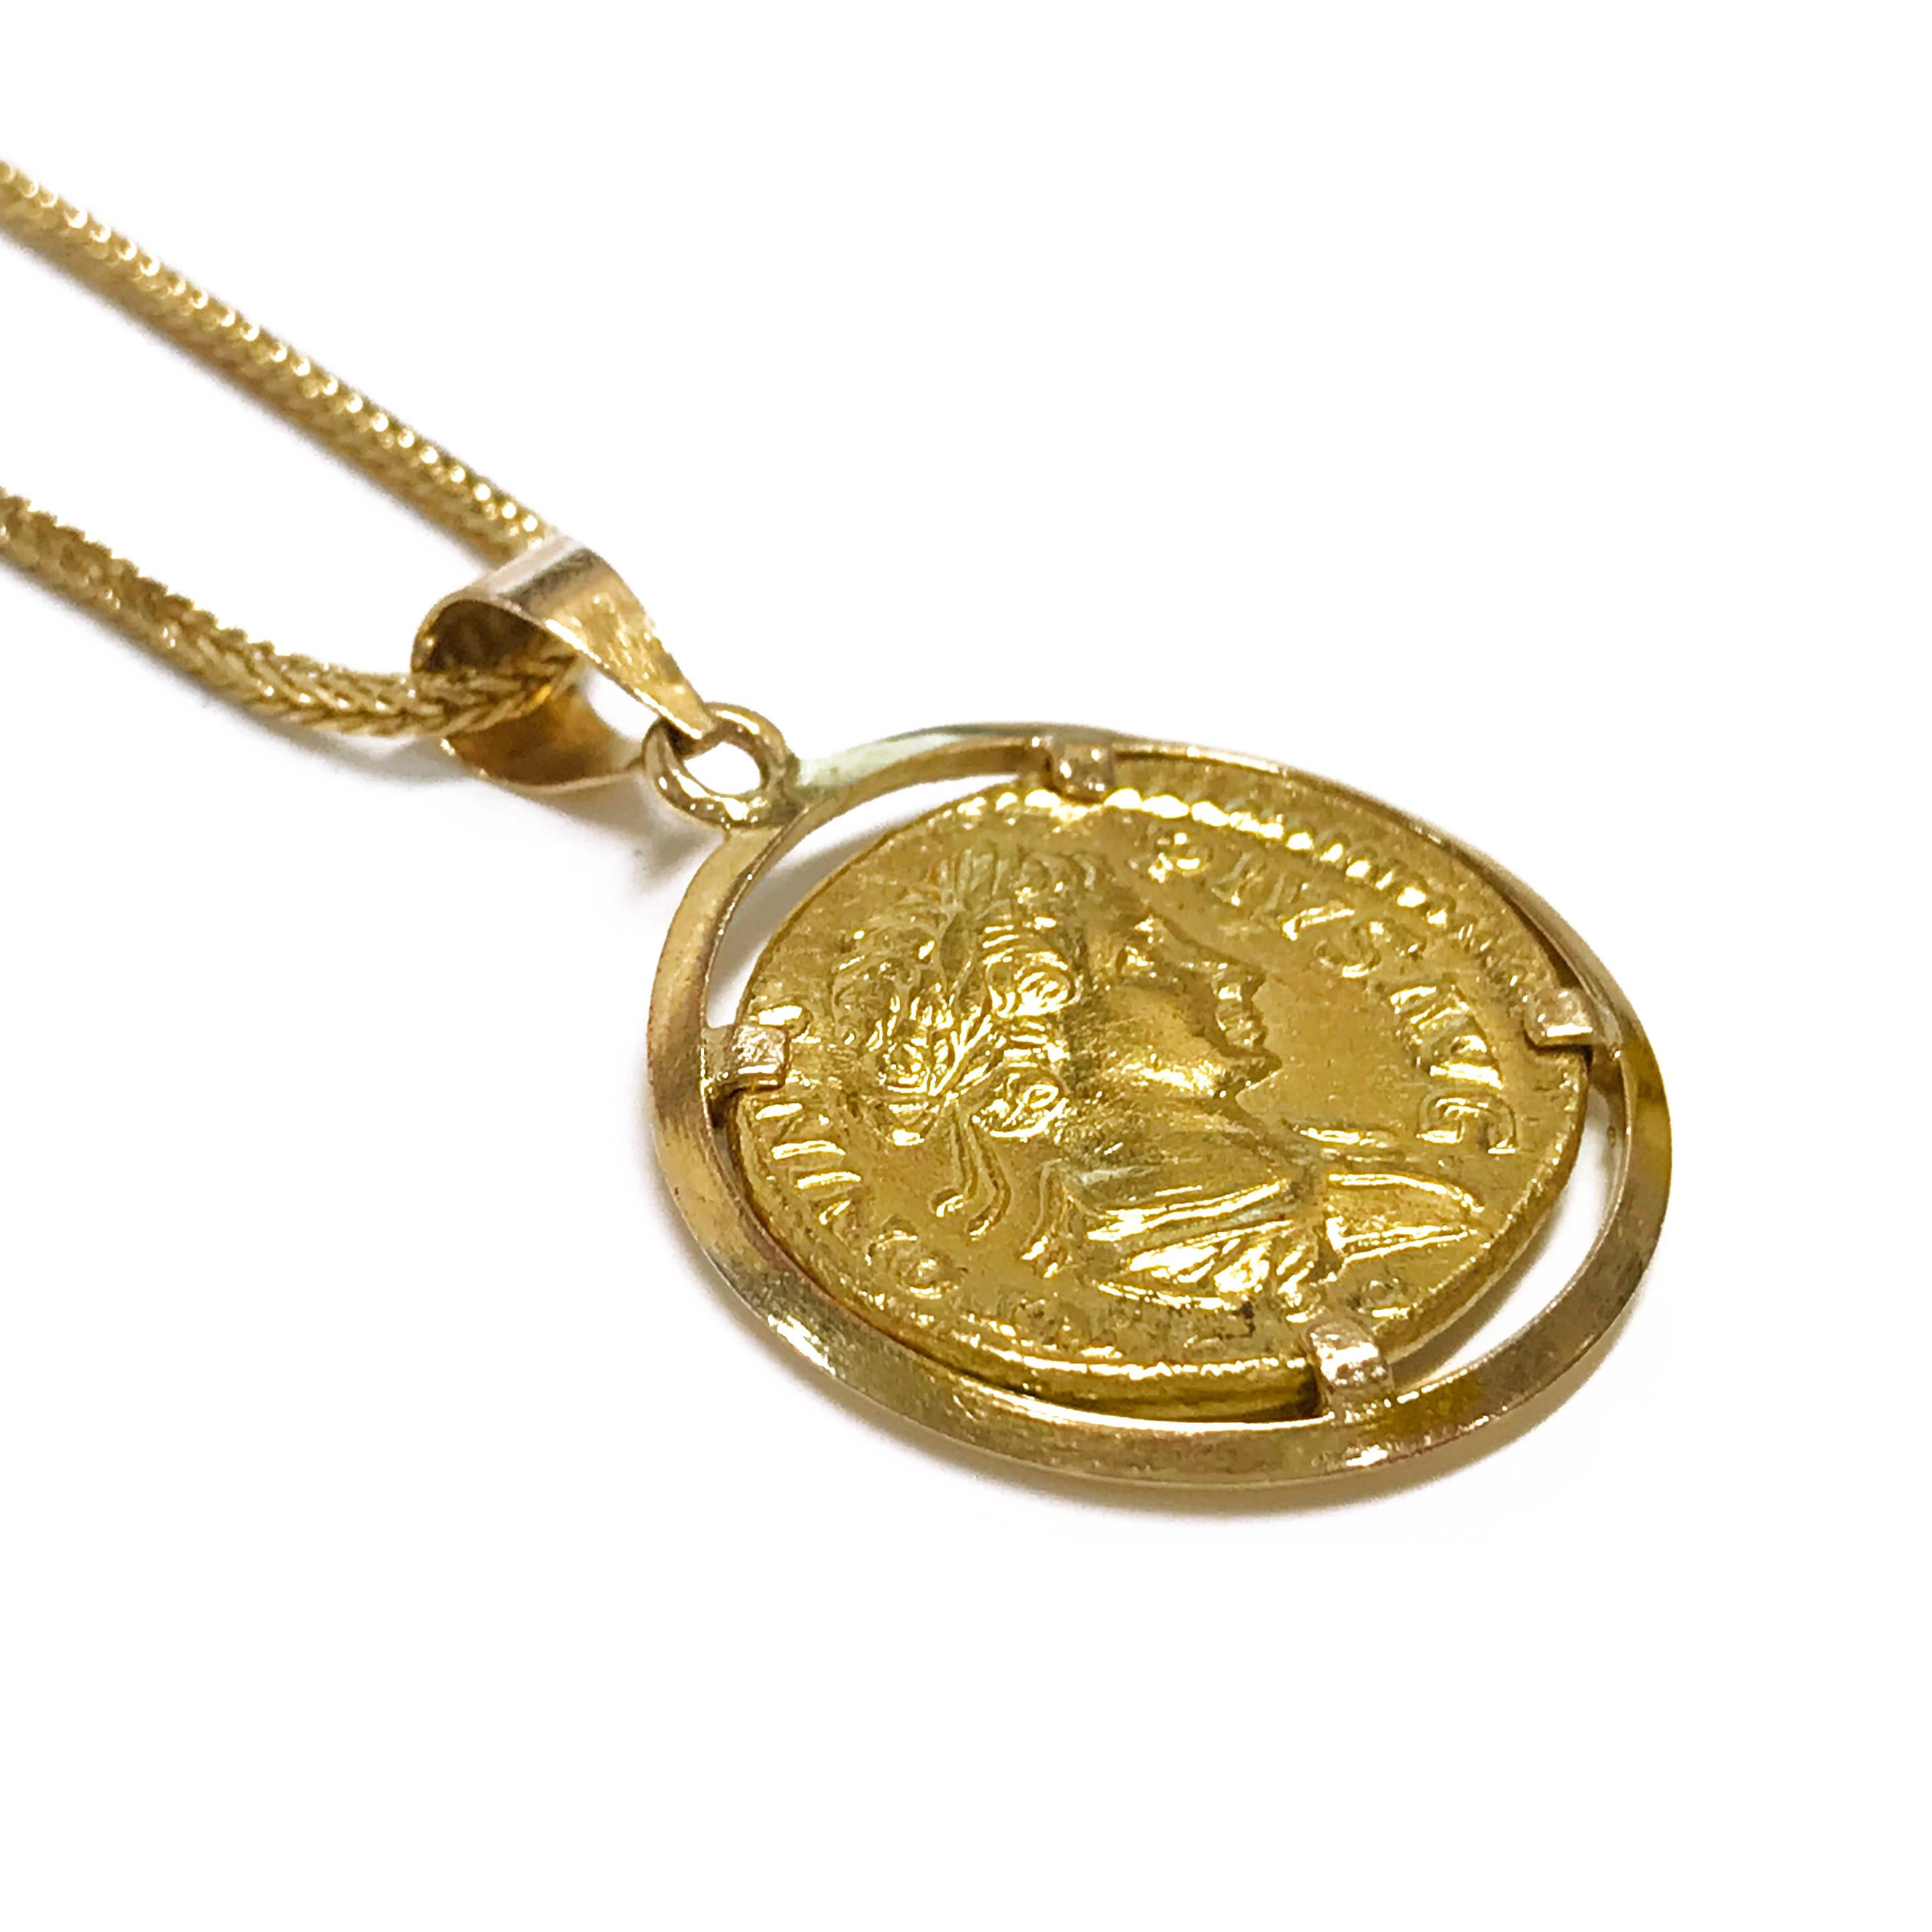 22 Karat Gold Coin Pendant with 18 Karat Bezel and 18 Karat Rope Necklace. The coin measures 0.66mm tall x 0.74mm wide x 0.08mm deep. The front of the coin depicts the image of a woman in profile with a ribbon in her hair. The back of the coin has